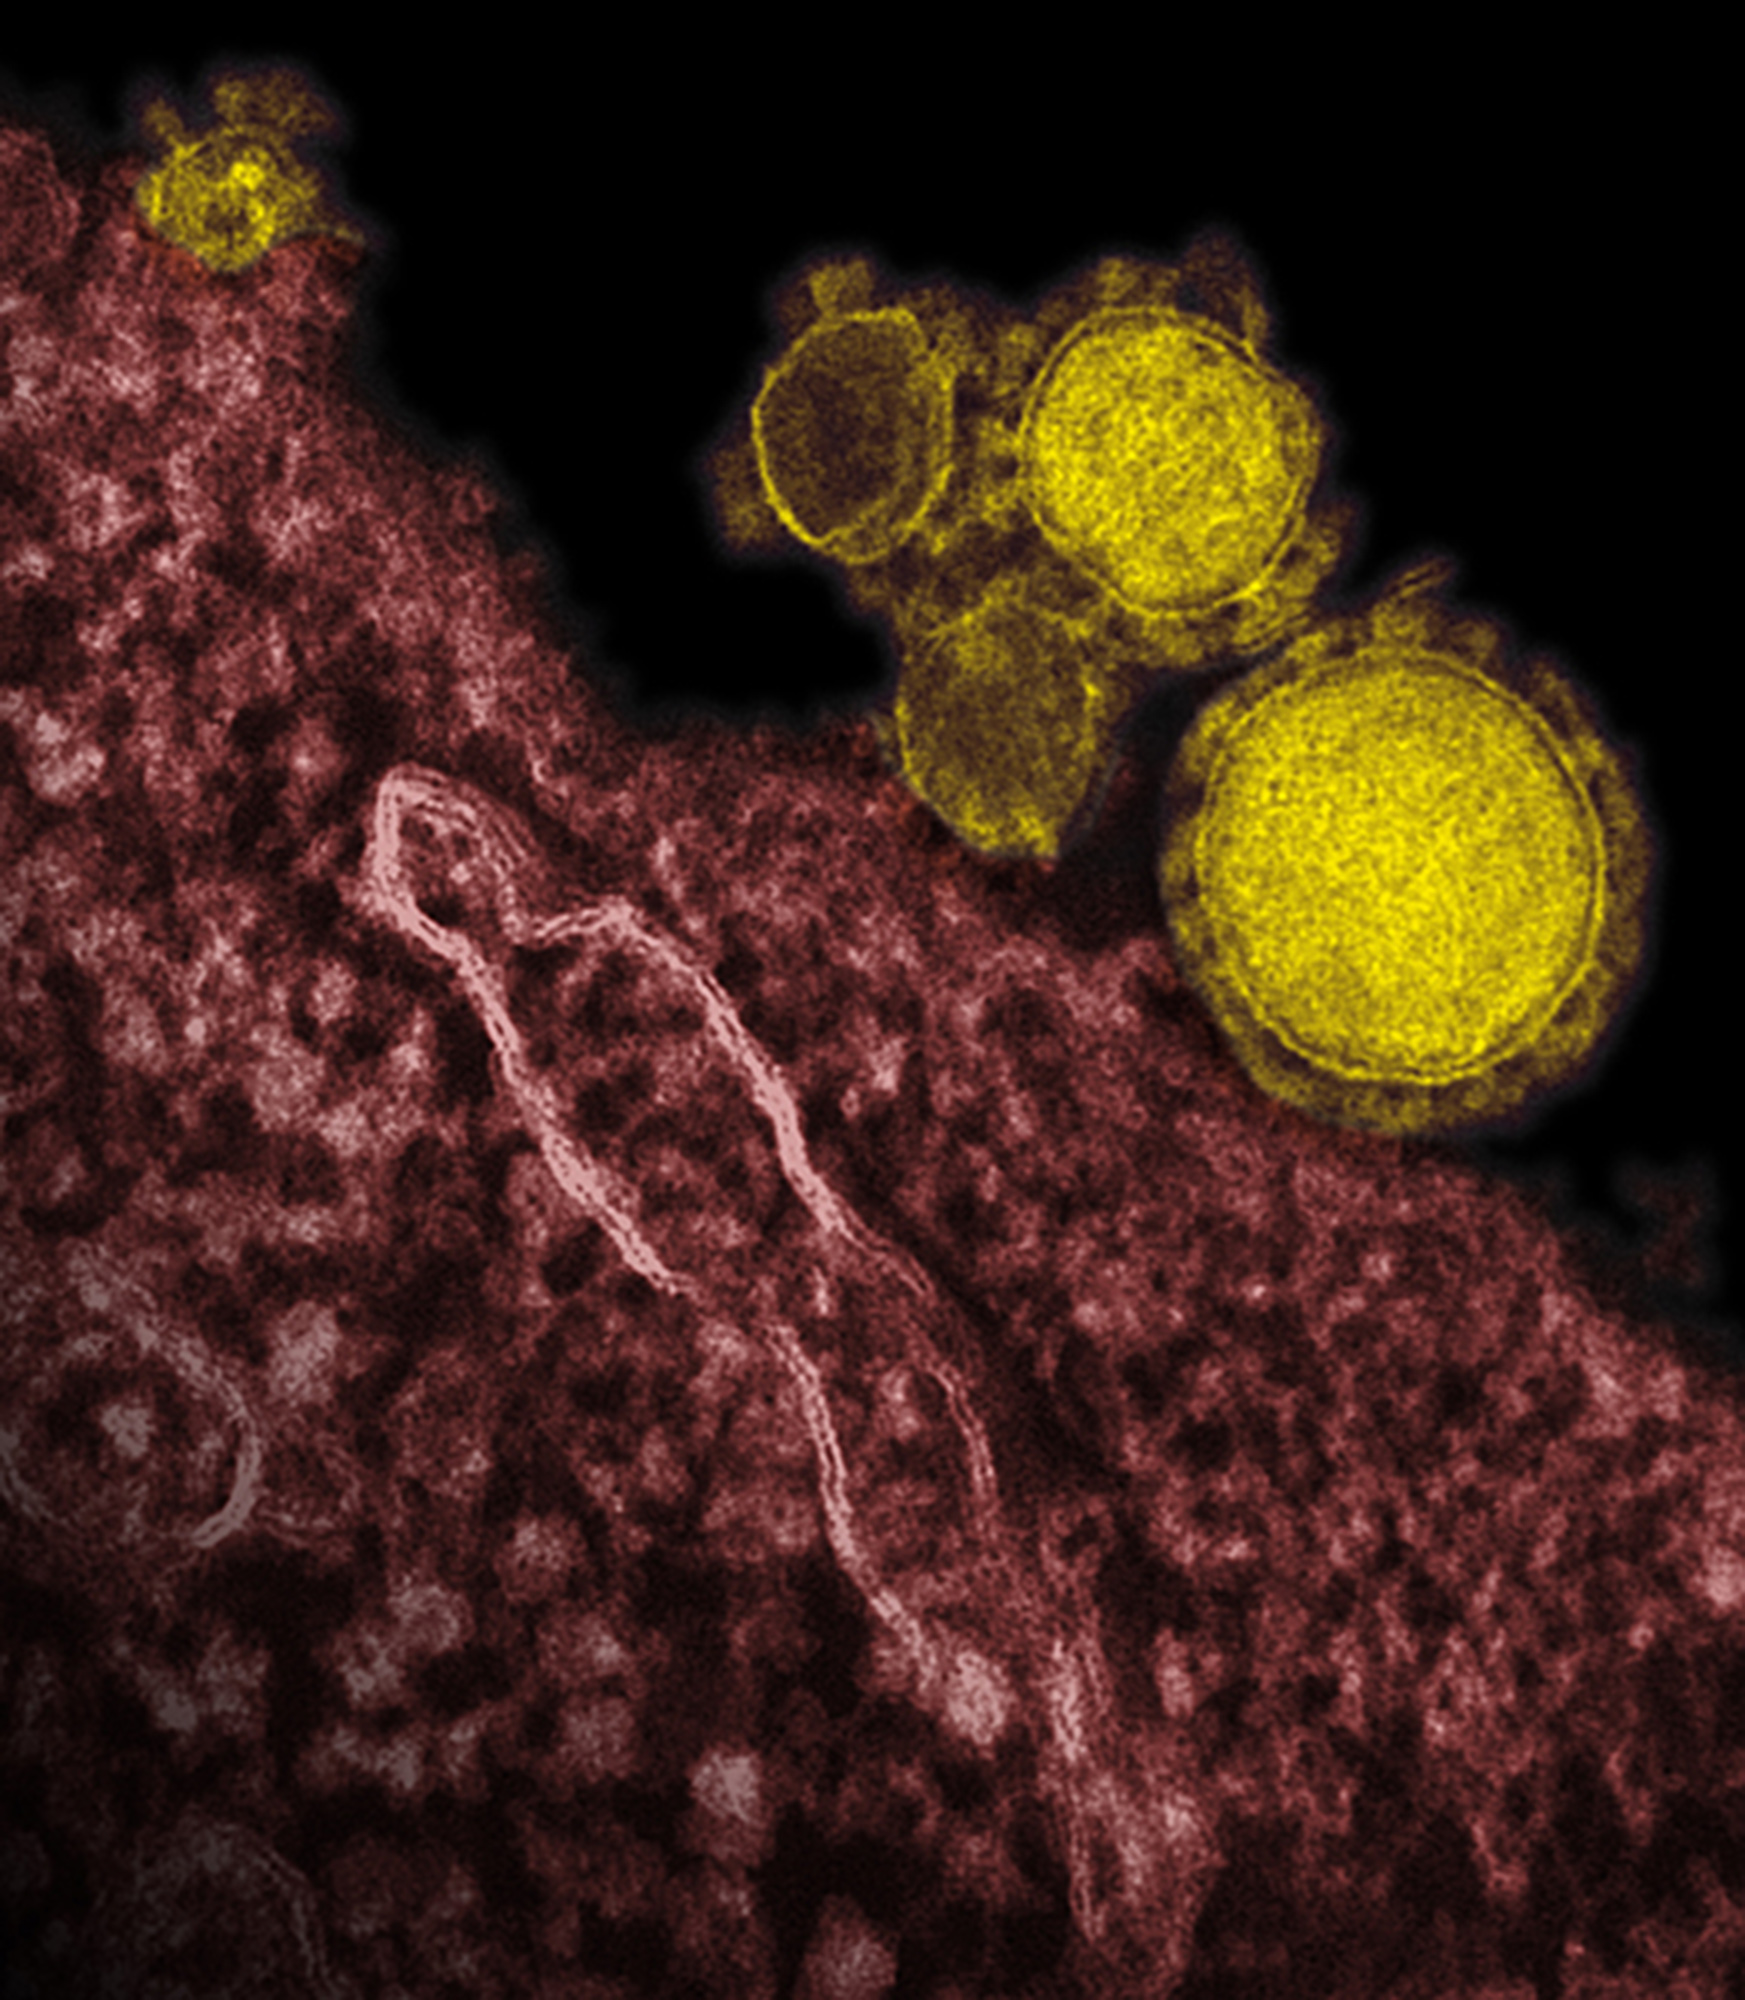 This undated file electron microscope image made available by the National Institute of Allergy and Infectious Diseases - Rocky Mountain Laboratories shows novel coronavirus particles, also known as the MERS virus, colorized in yellow. (AP)